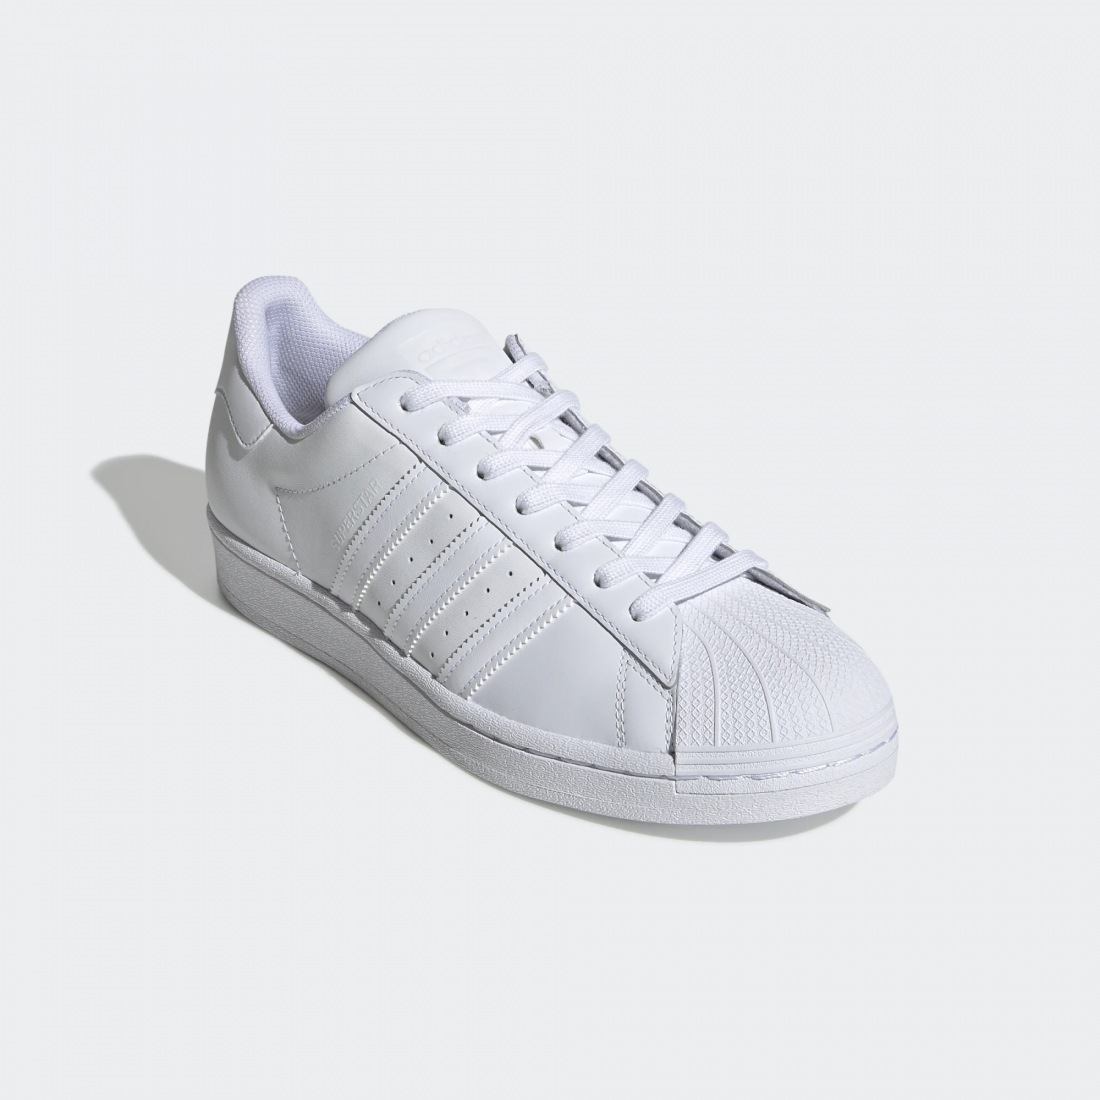 Buy online Cheap Adidas Superstar Shoes | Adidas Sale Outlet - Up to 50 ...